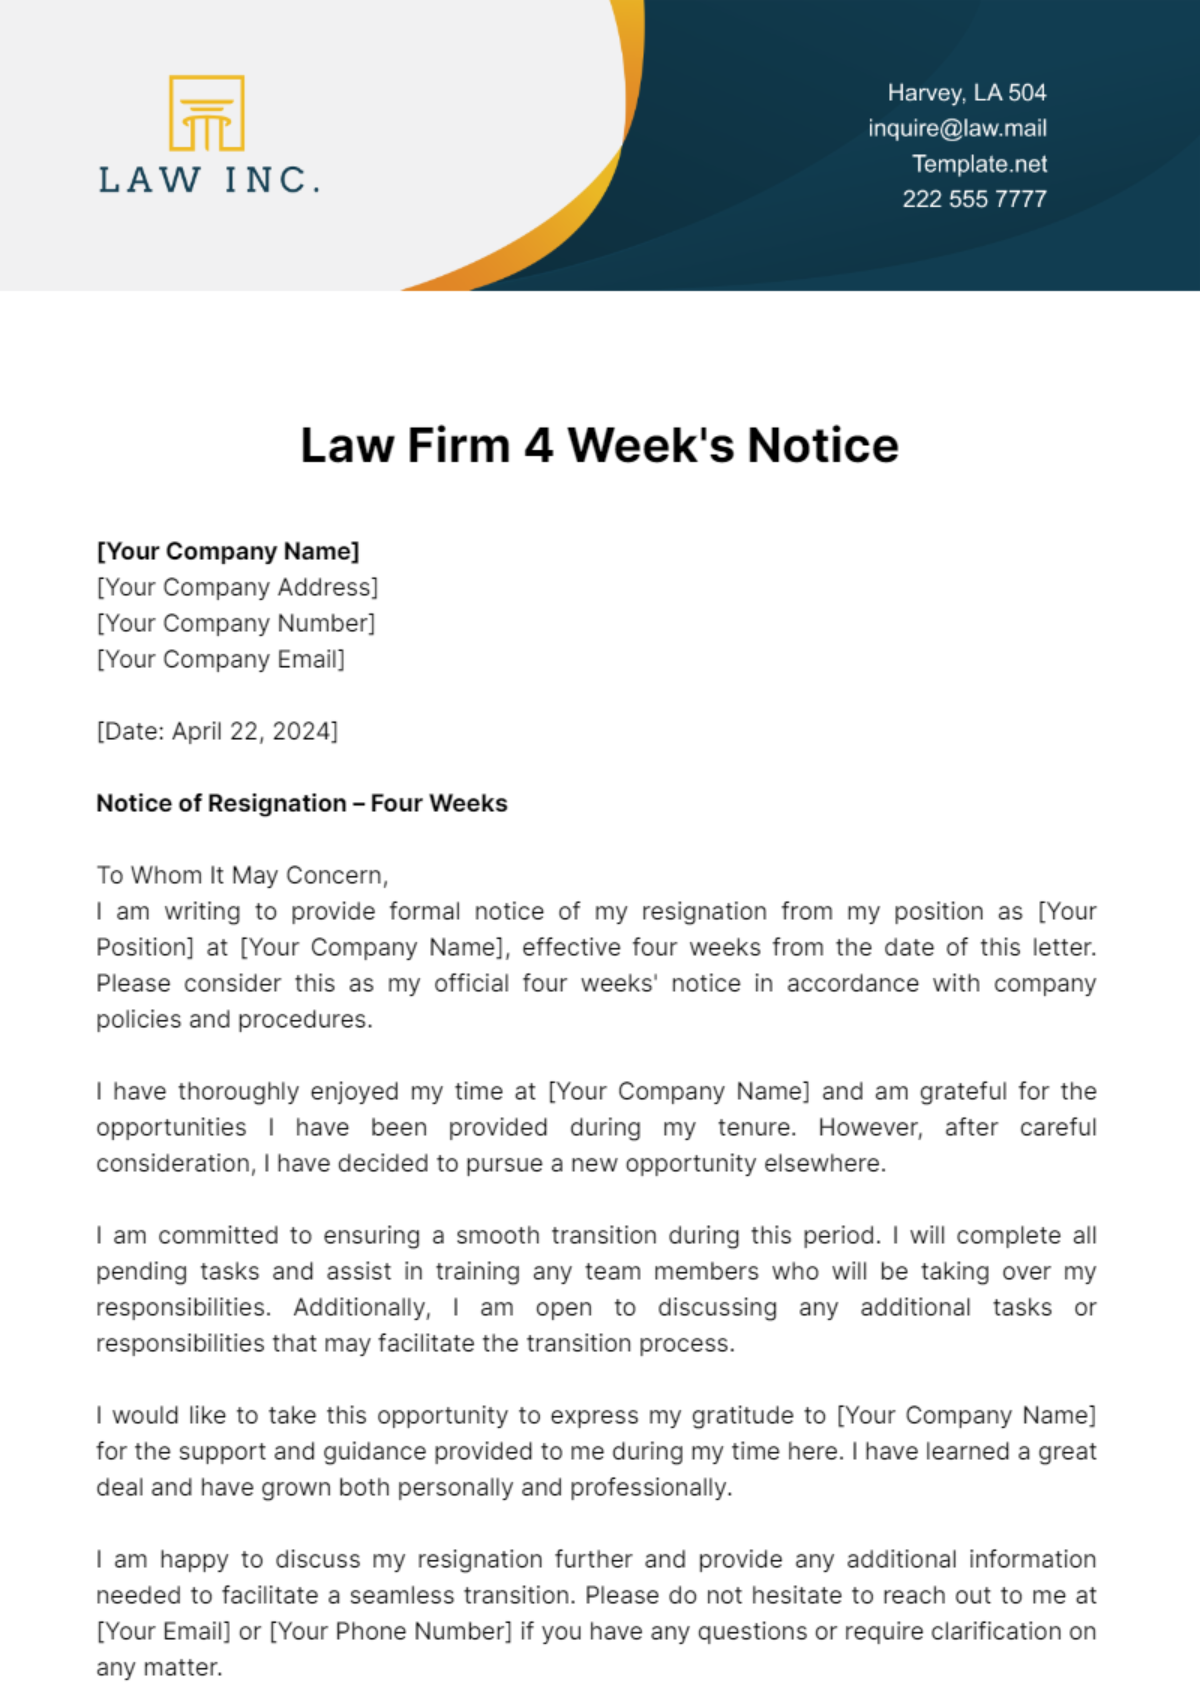 Law Firm 4 Week's Notice Template